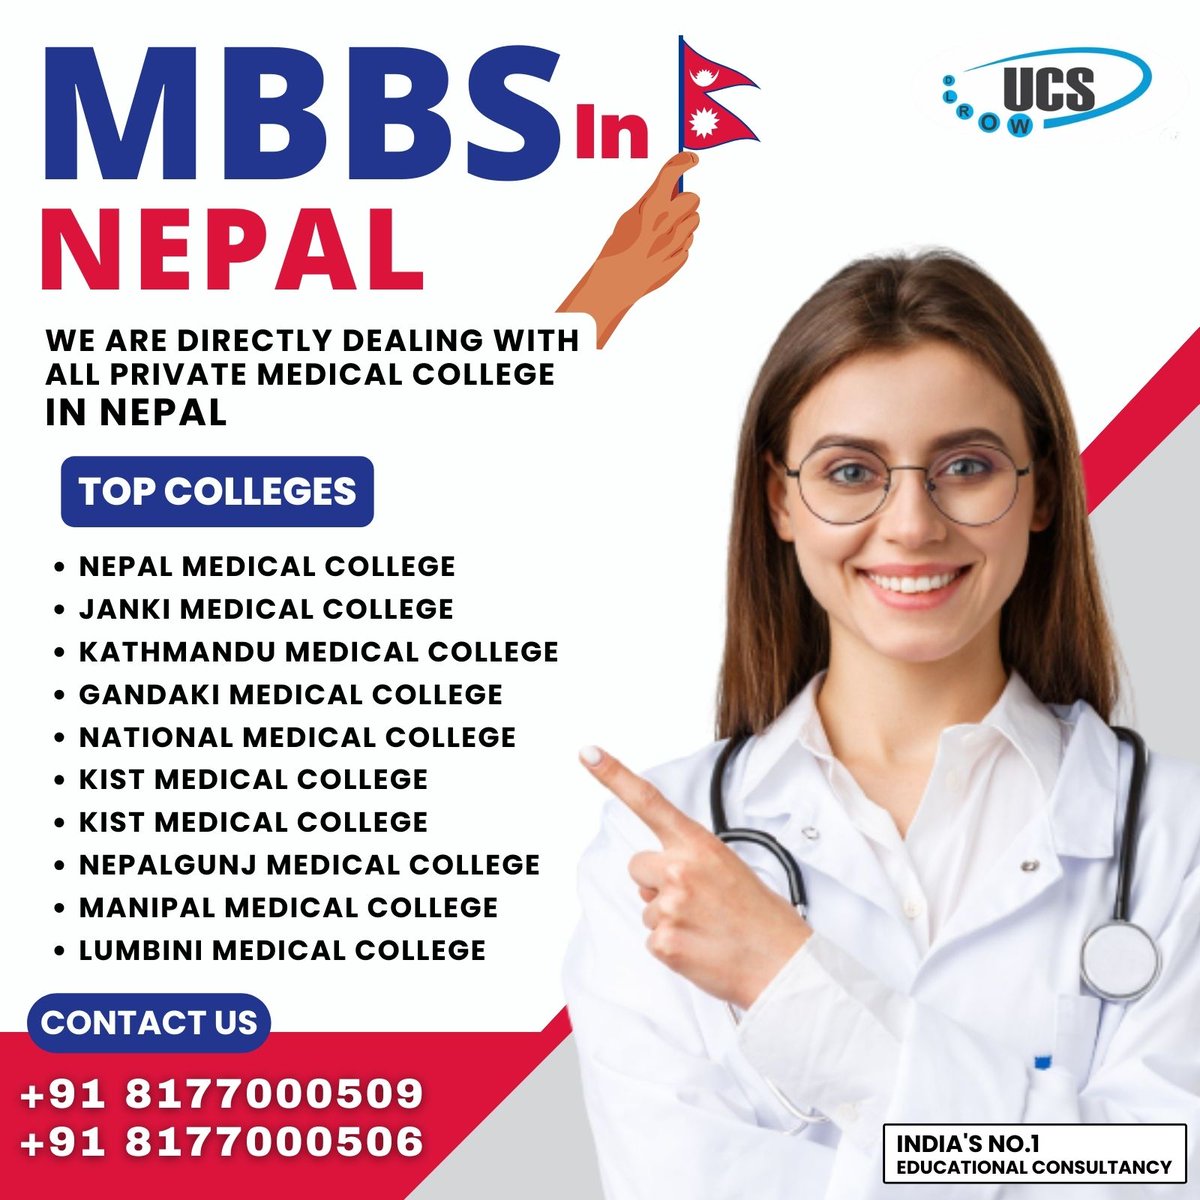 Study MBBS in Nepal 2023
 #mbbs #mbbsabroad #mbbsadmission2023 #mbbsinnepal #studymbbsinnepal #mbbsstudent #mbbstudyabroad #mbbscollegesinnepal #neetug2023 #NEET2023 #NEETUGAdmission #mbbsadmissionabroad #medicaladmission2023 #studyinnepal